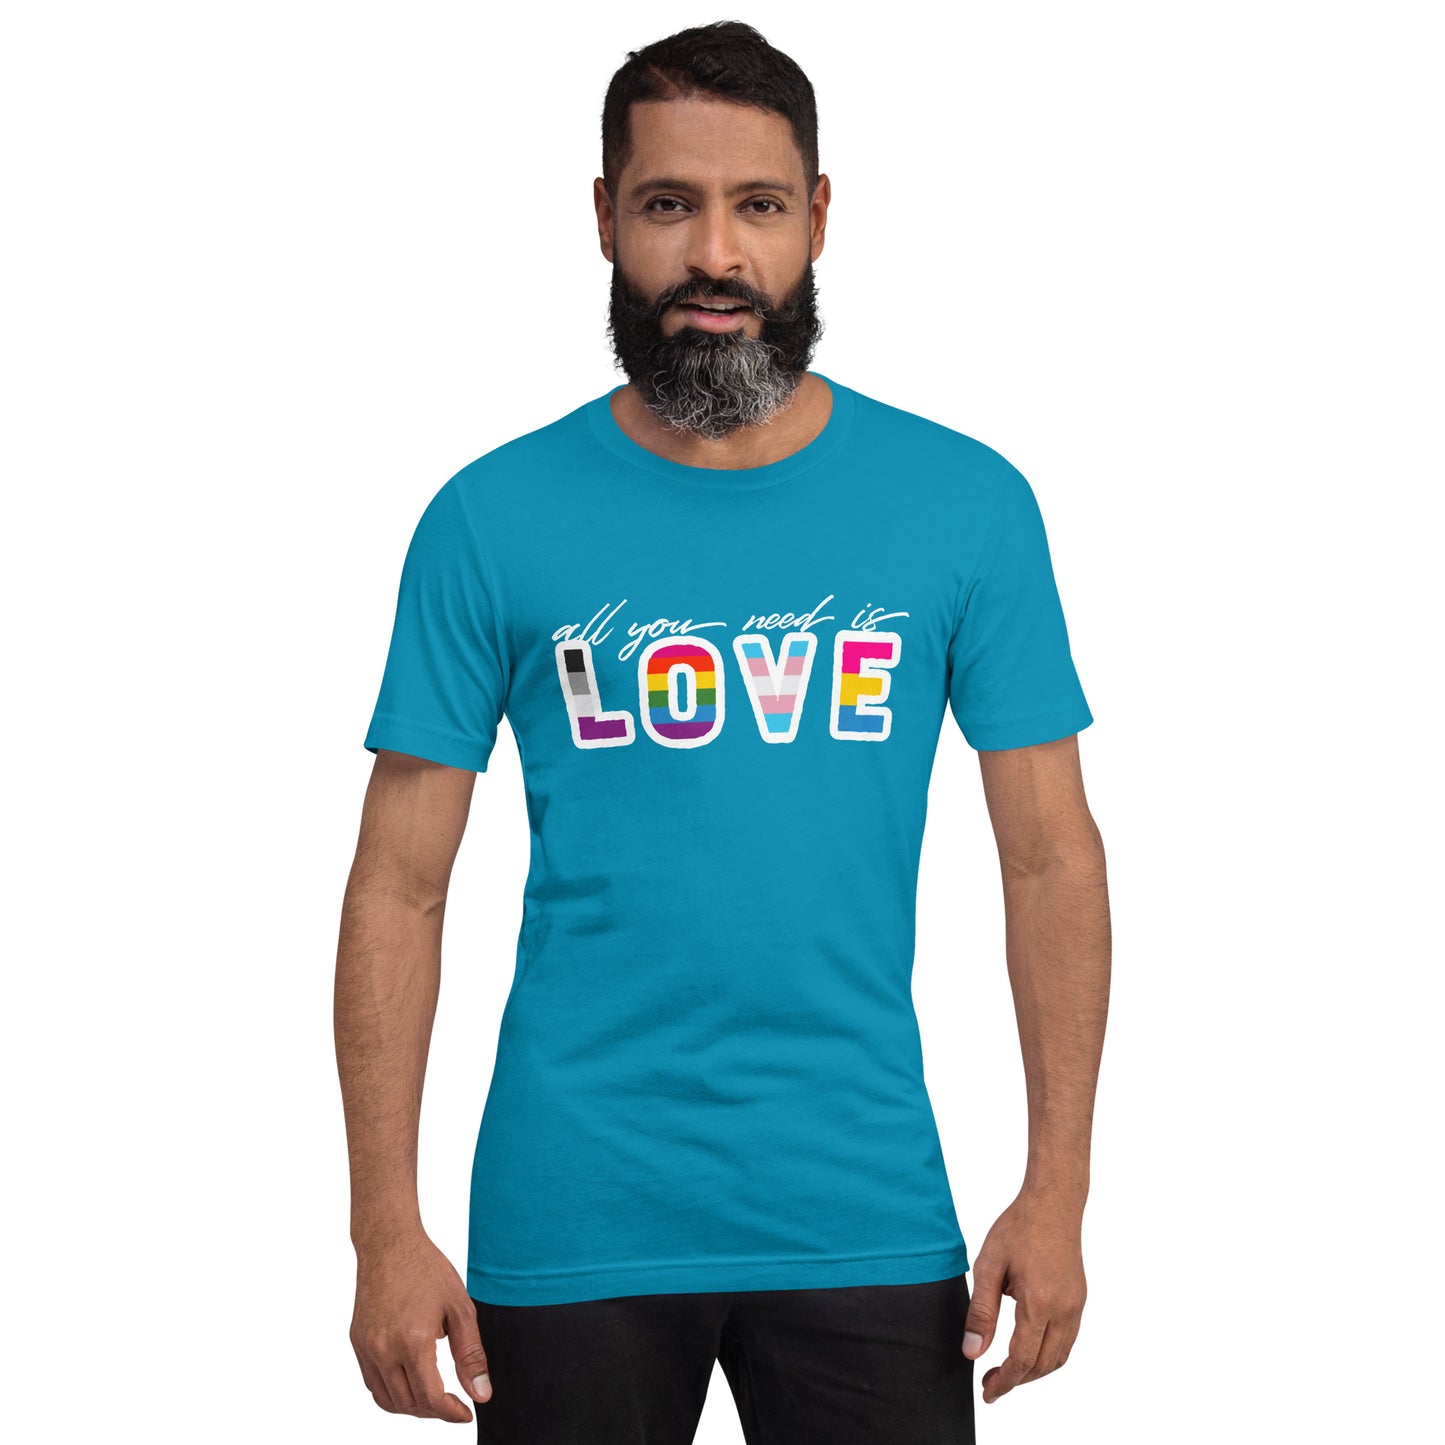 Love Is All You Need - crew neck t-shirt